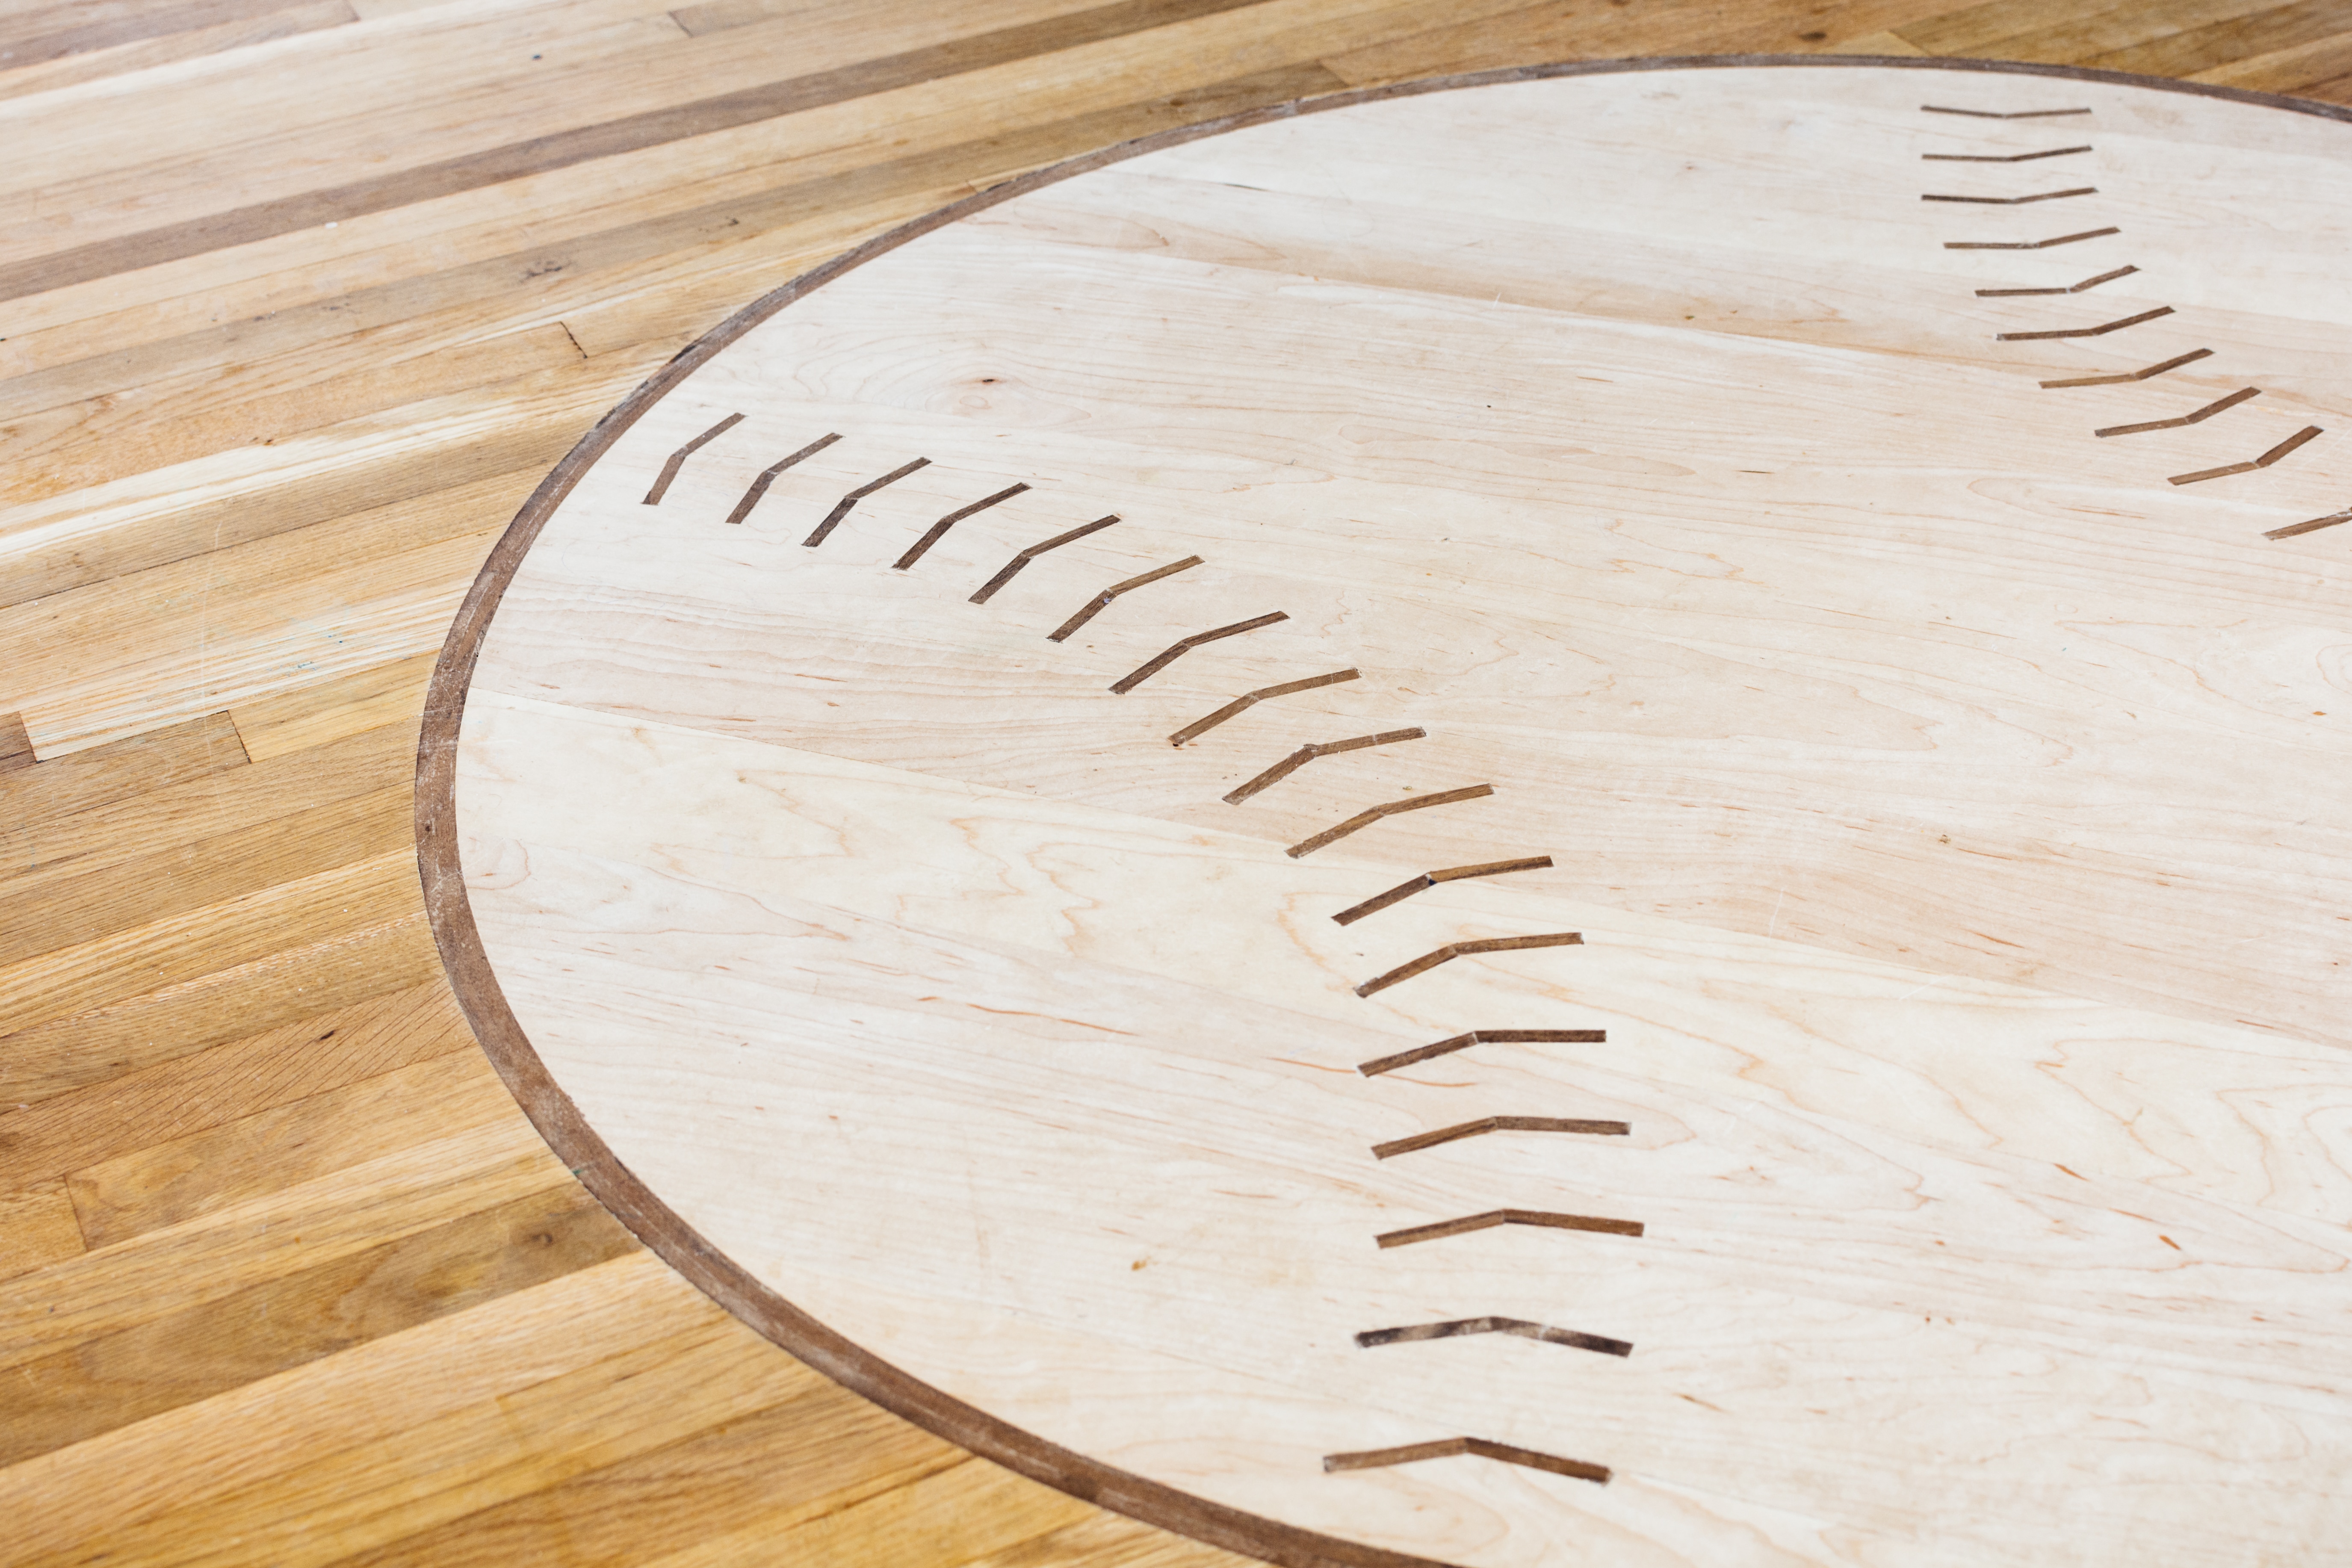 Say "custom hardwood floor design" and most people probably think of a herringbone floor or a more formal pattern we're accustomed to seeing in large, historic buildings . They probably don't think of baseball medallion. But we do!